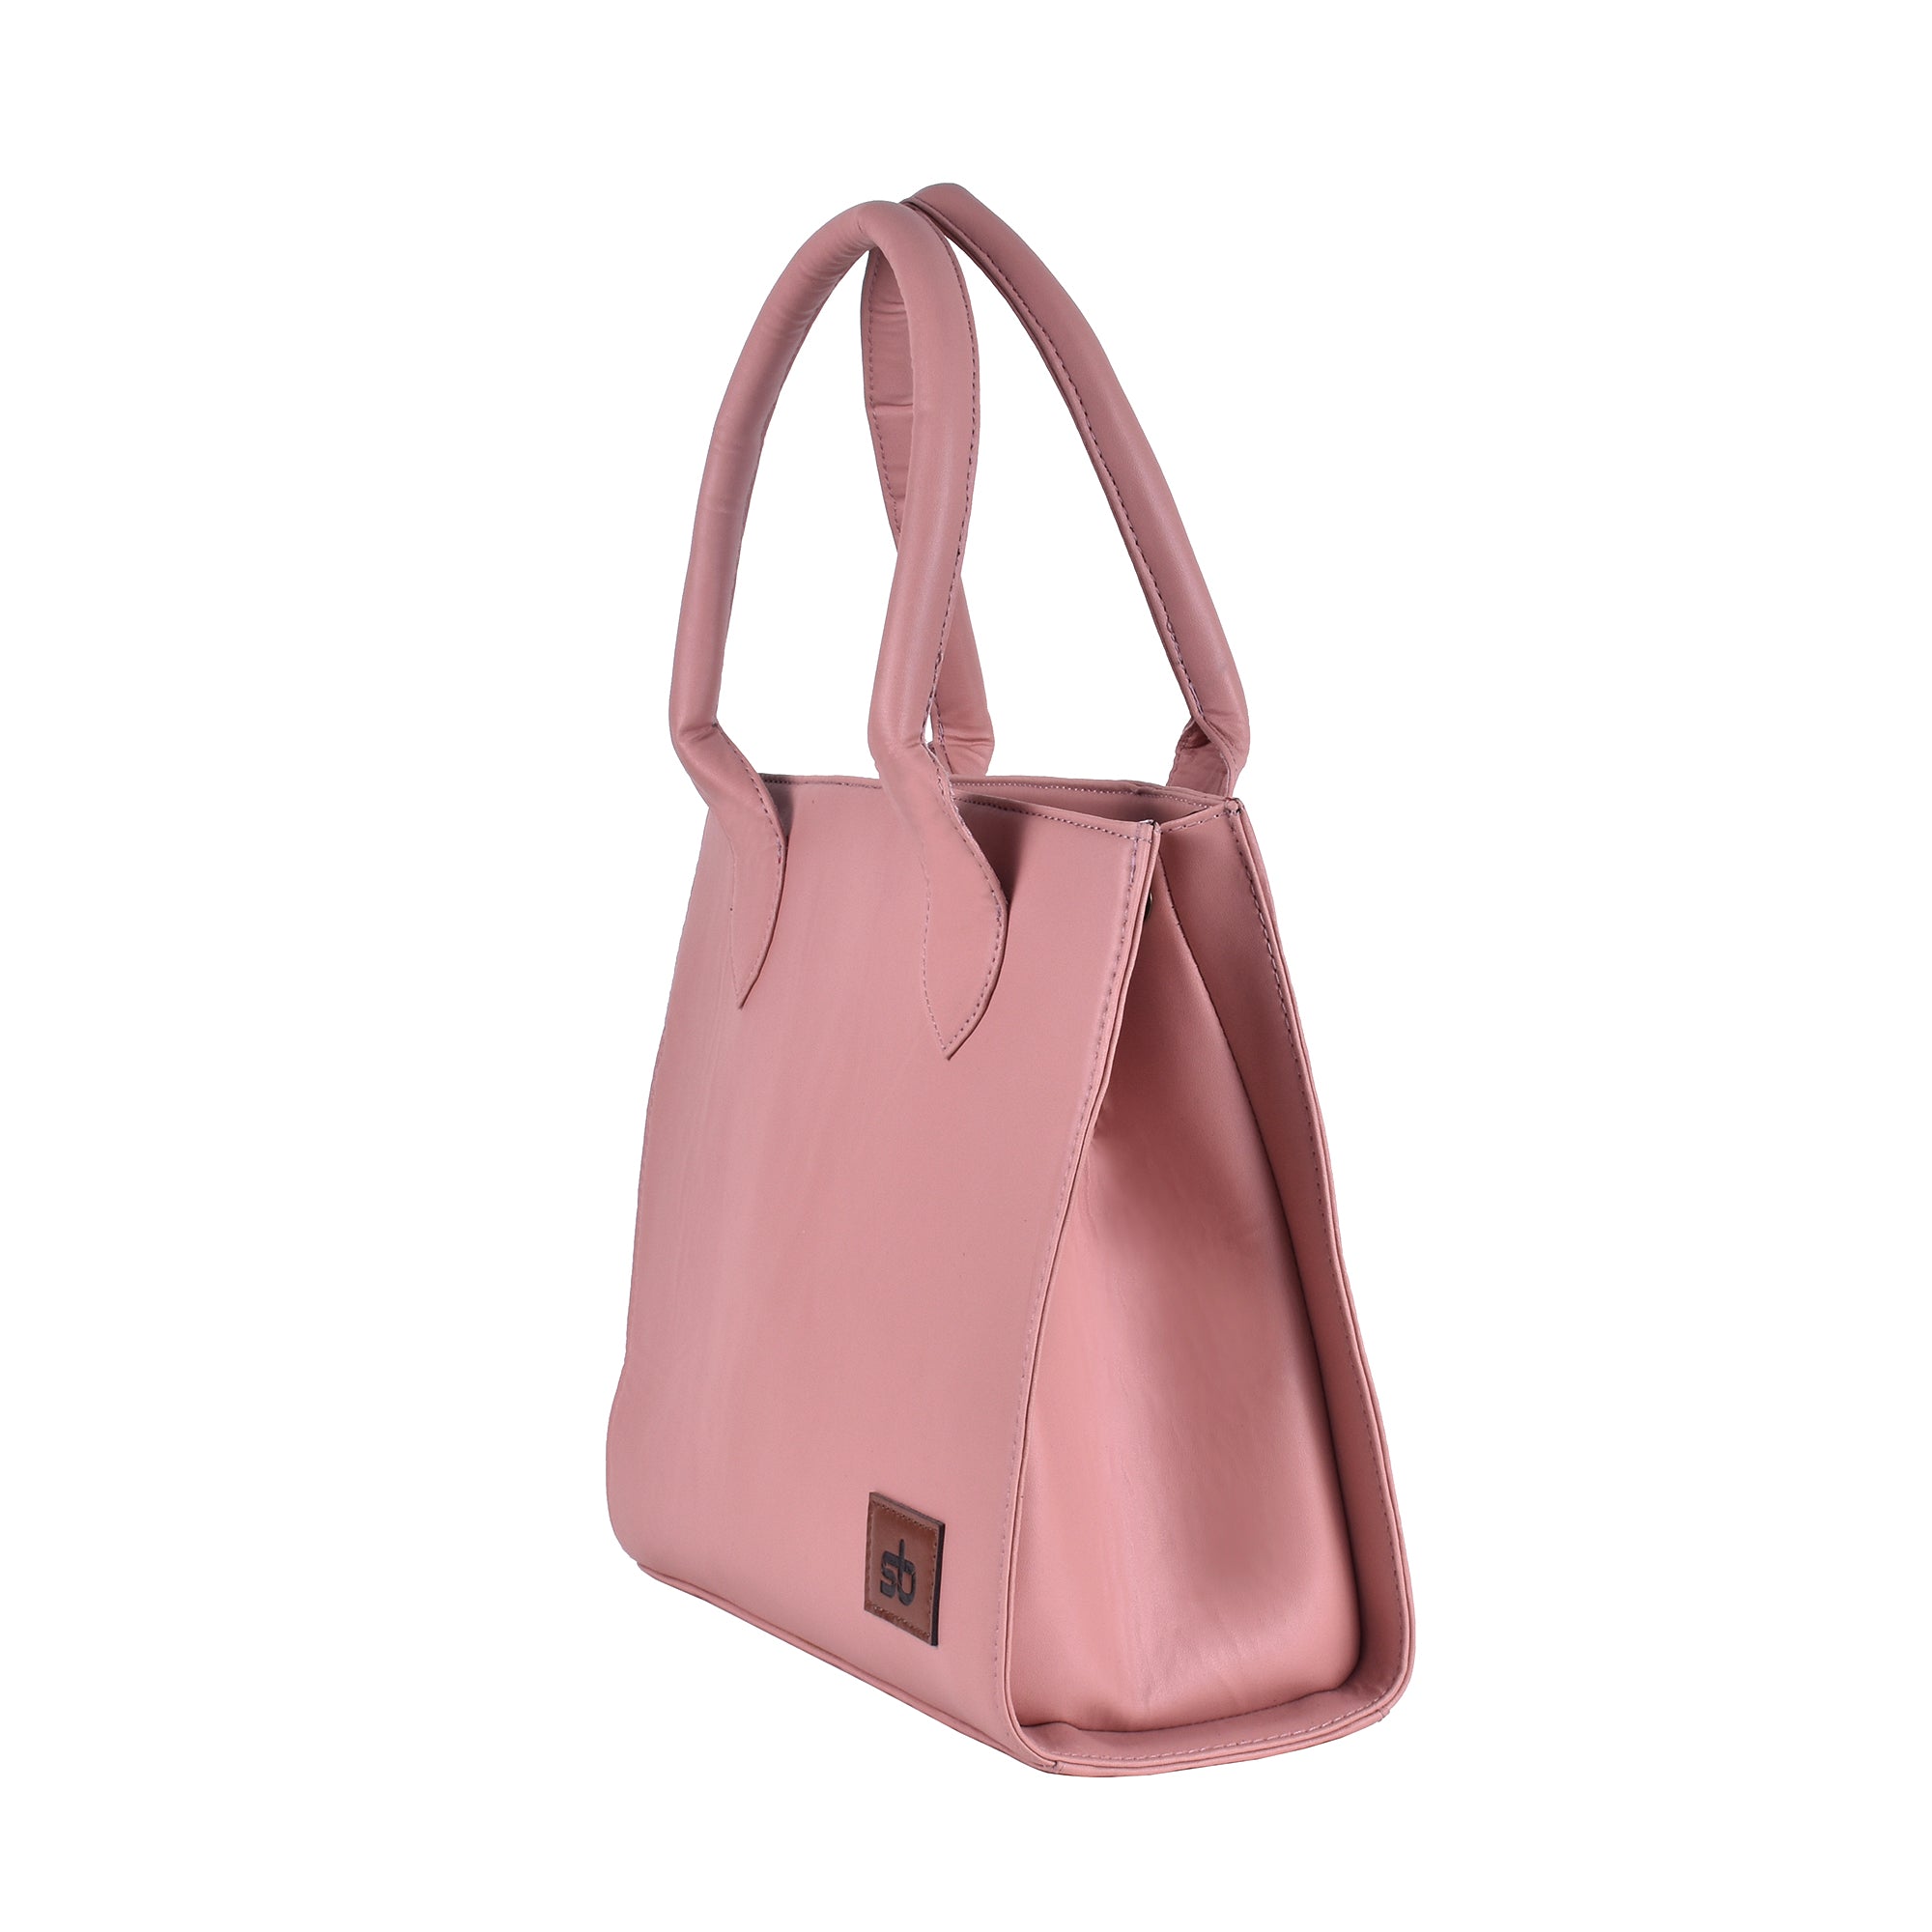 Women's Tote Bag With Adjustable Strap - Style Bite